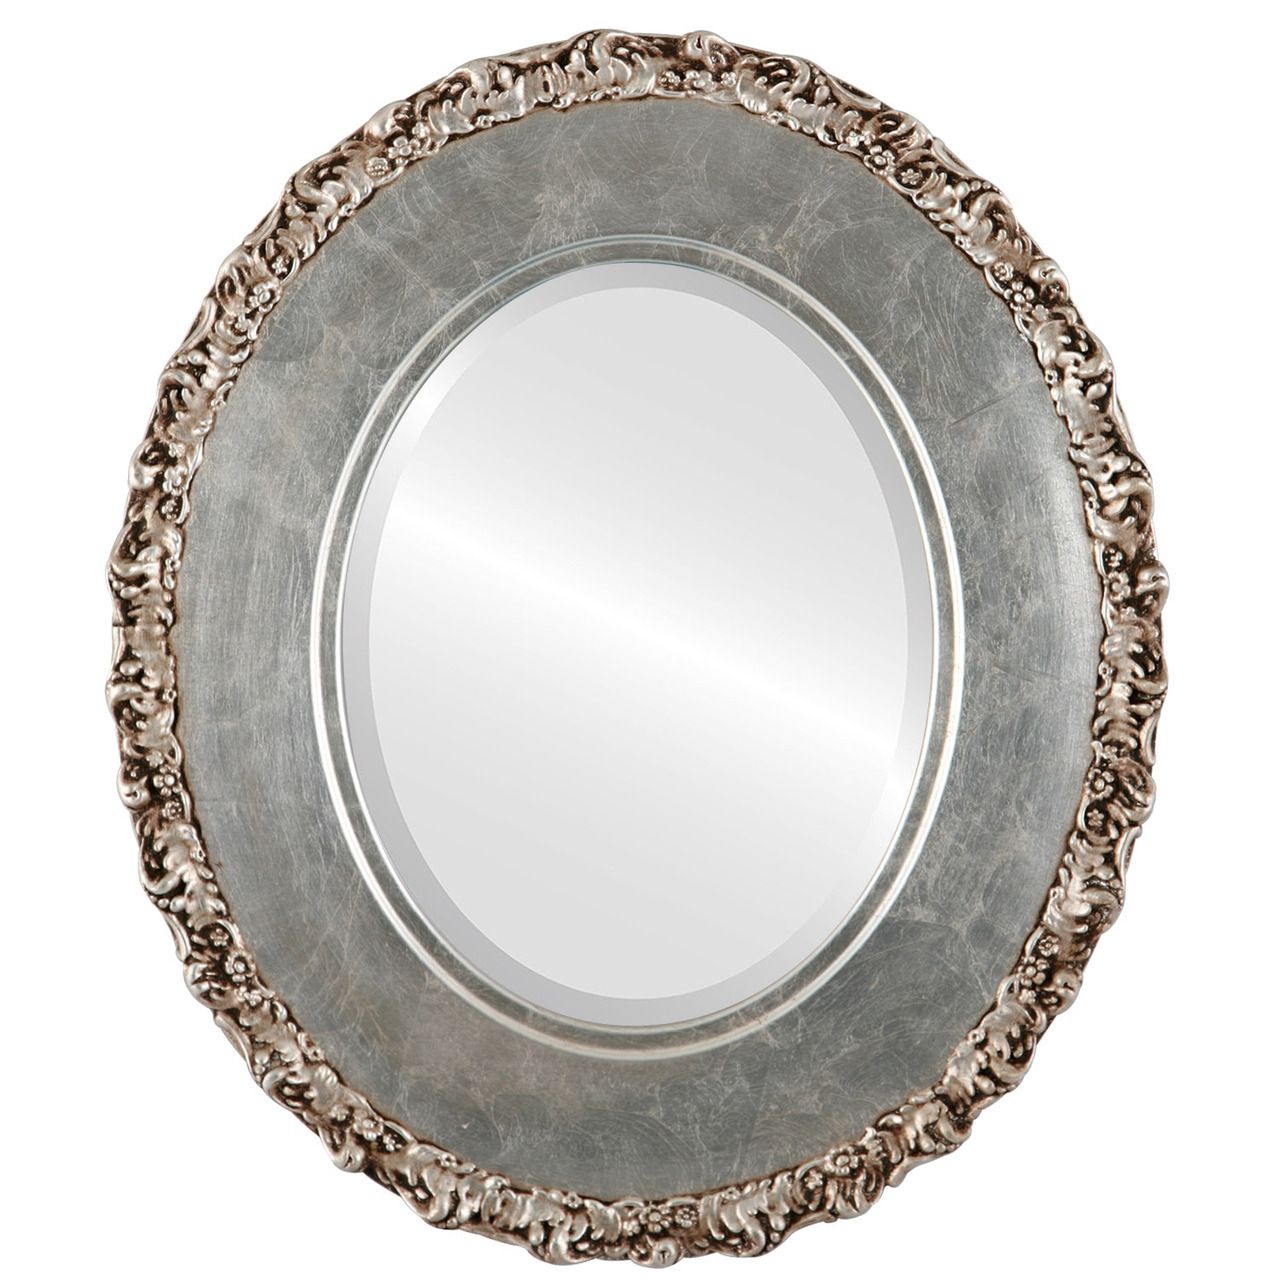 Antique Brown Oval Mirrors From $153 | Free Shipping With Regard To Silver Leaf Round Wall Mirrors (View 8 of 15)